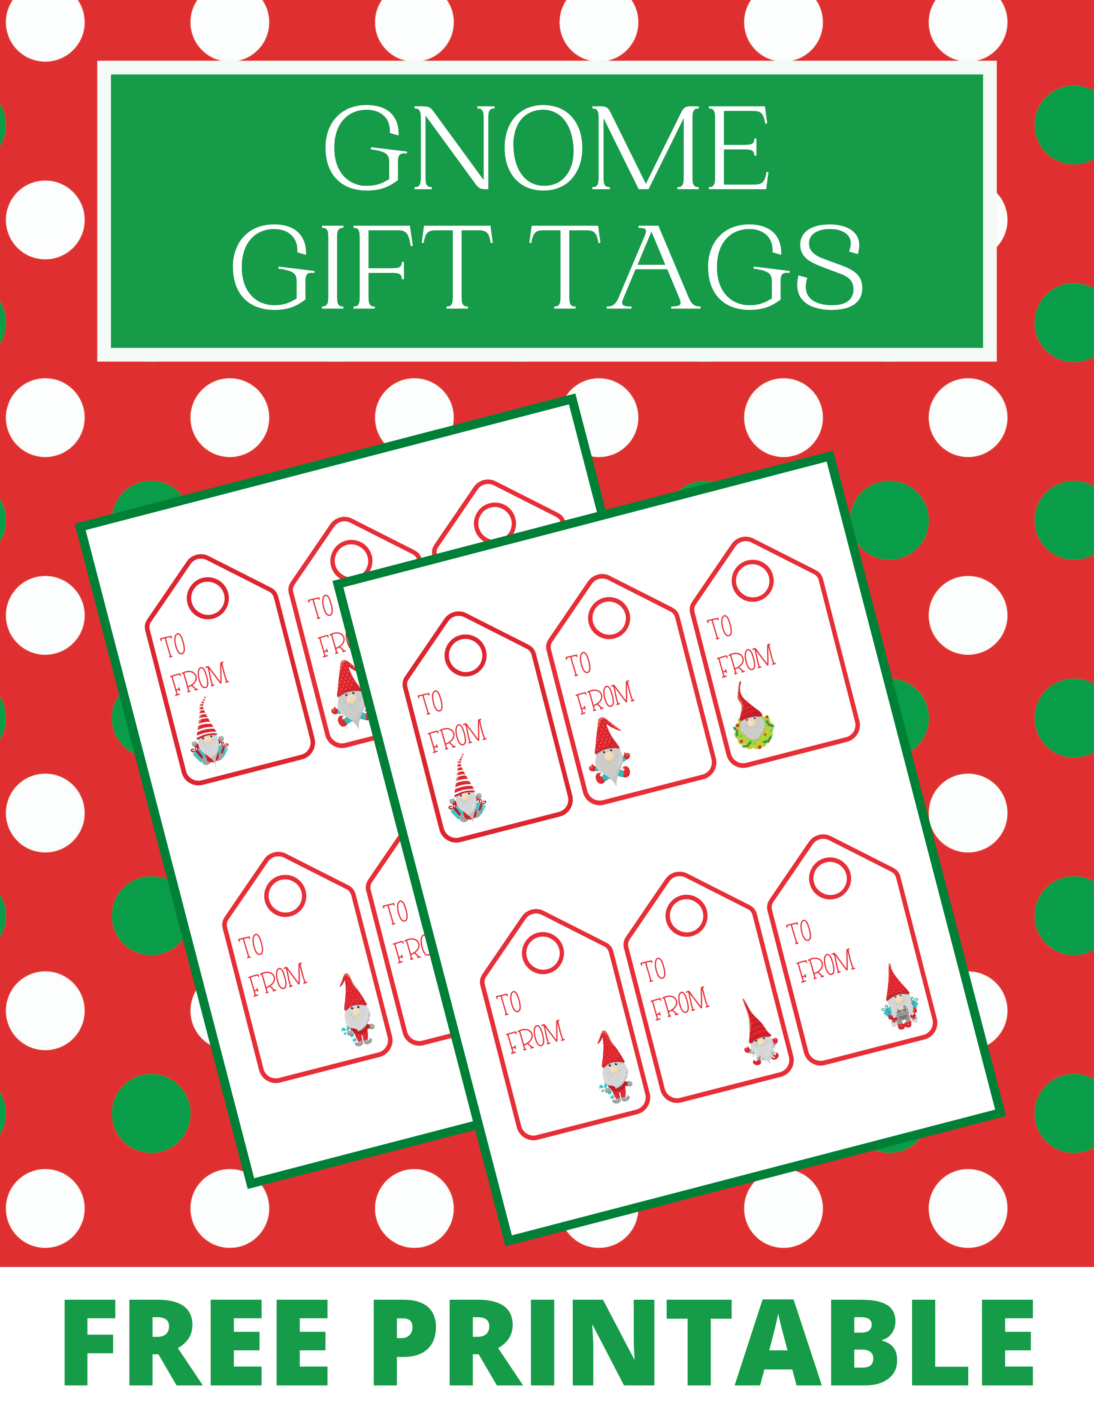 Free Printable Gnome Gift Tags Outnumbered 3 to 1